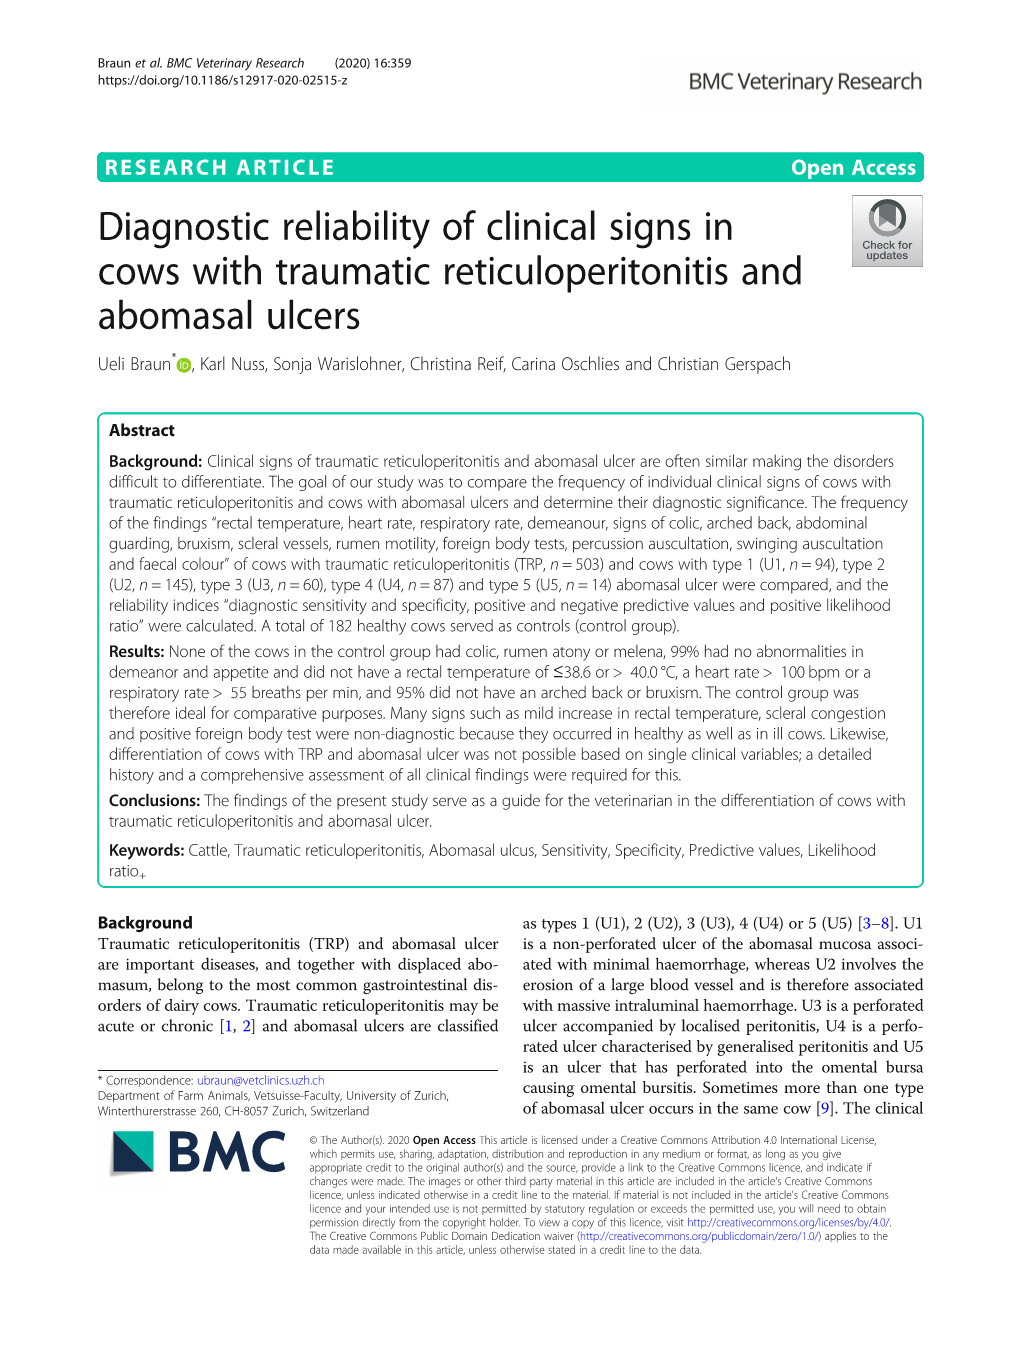 Diagnostic Reliability of Clinical Signs in Cows with Traumatic